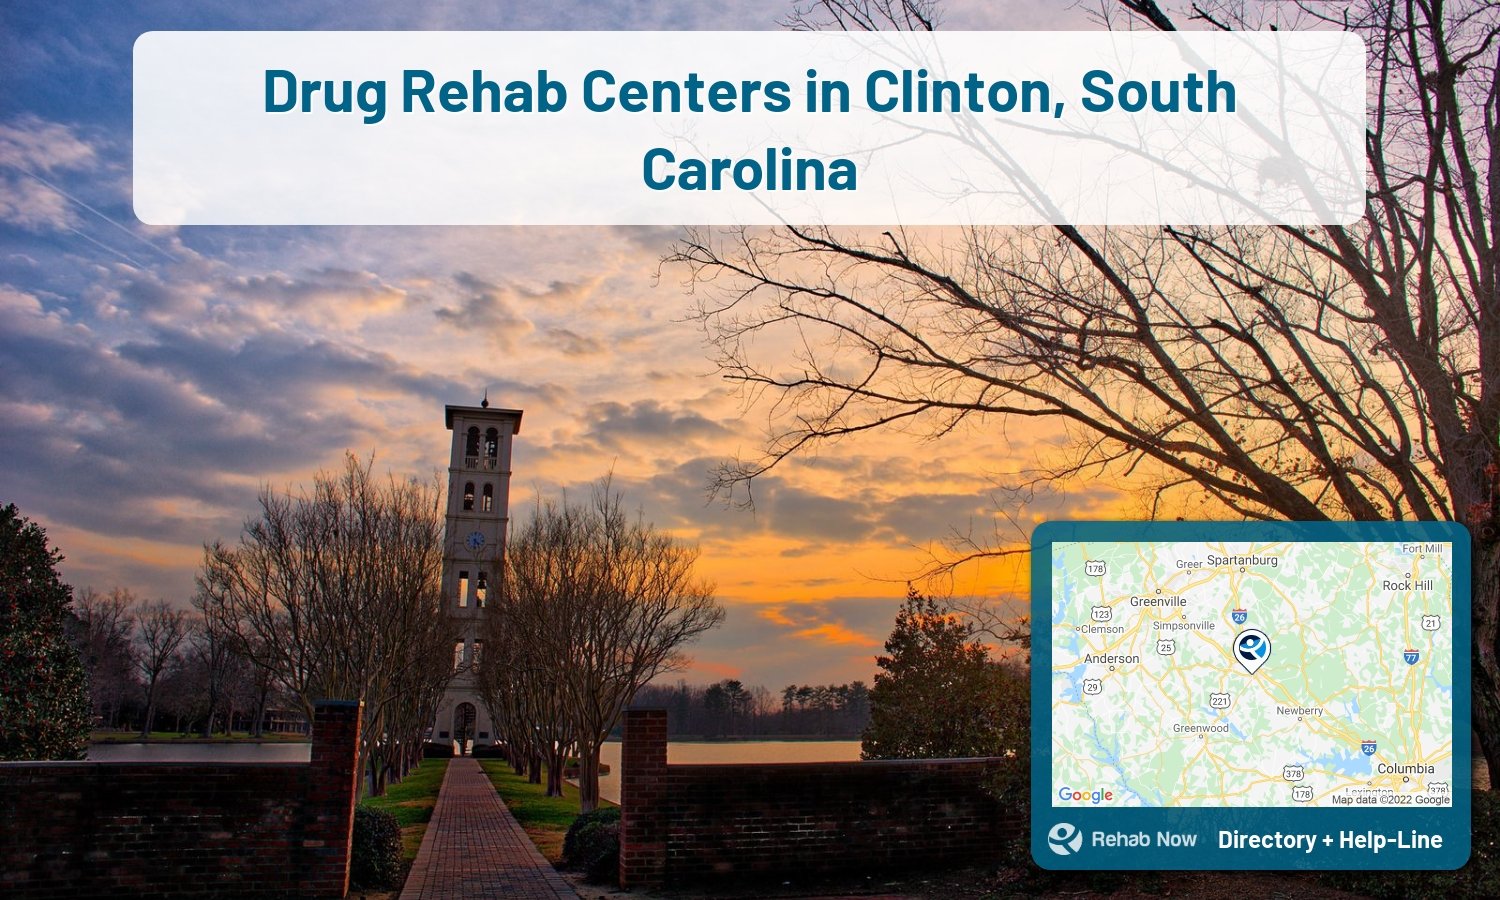 List of alcohol and drug treatment centers near you in Clinton, South Carolina. Research certifications, programs, methods, pricing, and more.